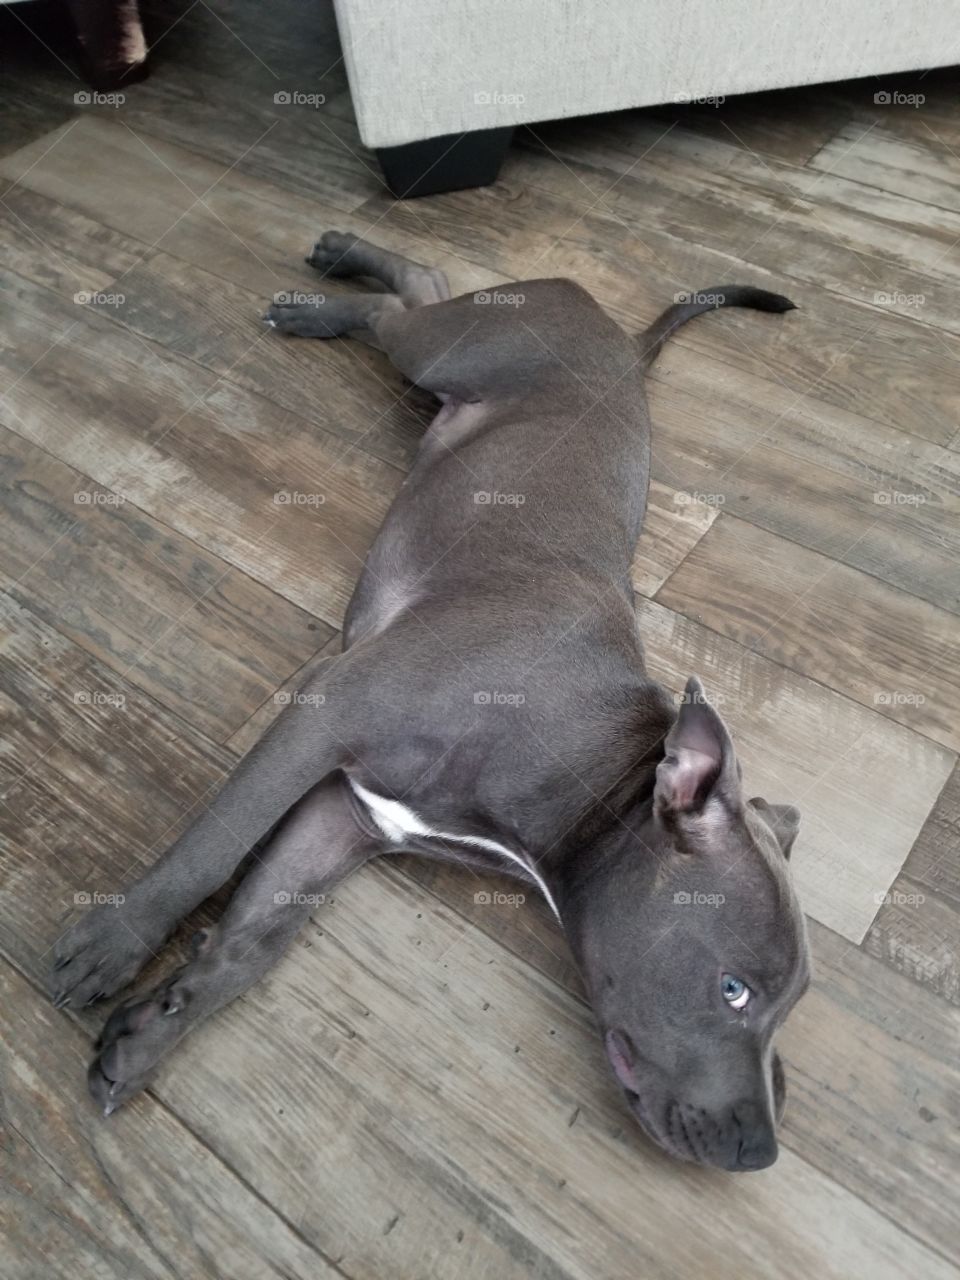 silly Staffordshire Bull Terrier puppy on wood plank floor